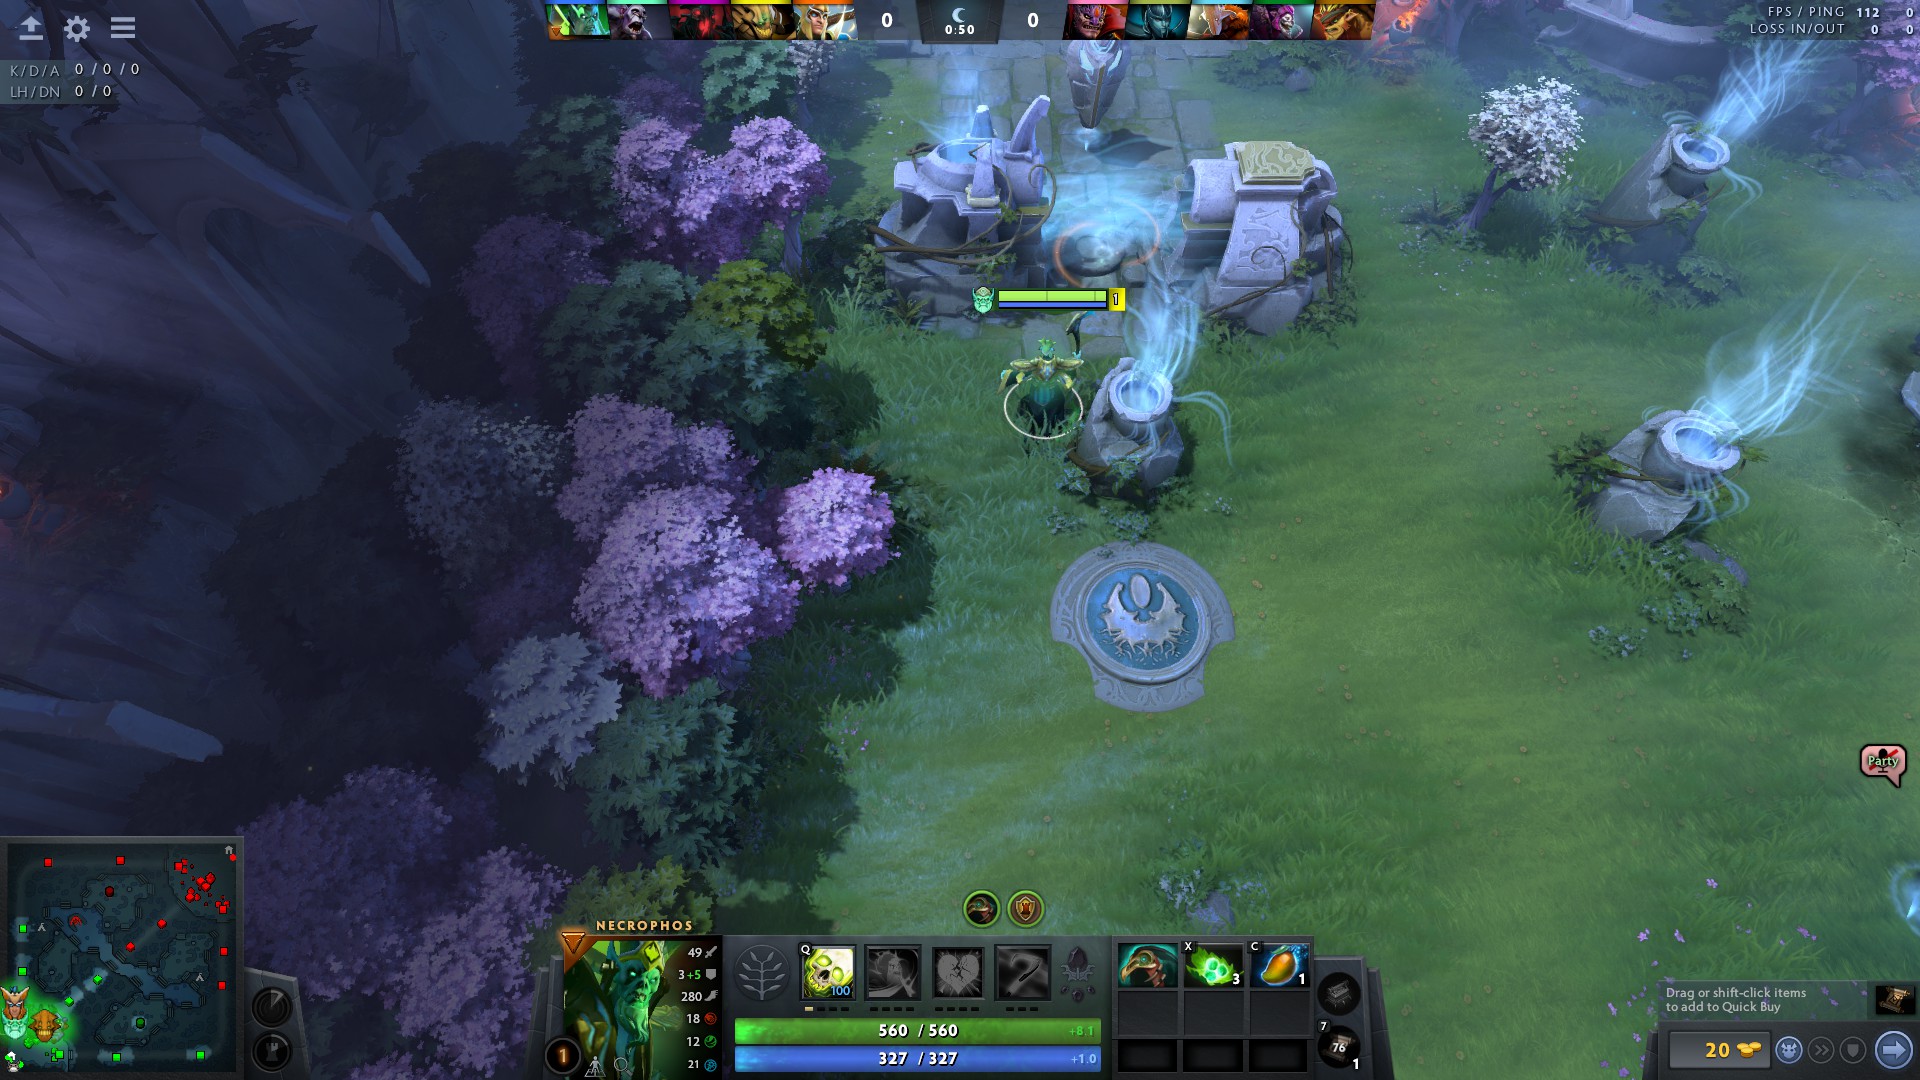 How to Change the Map Position in DOTA 2